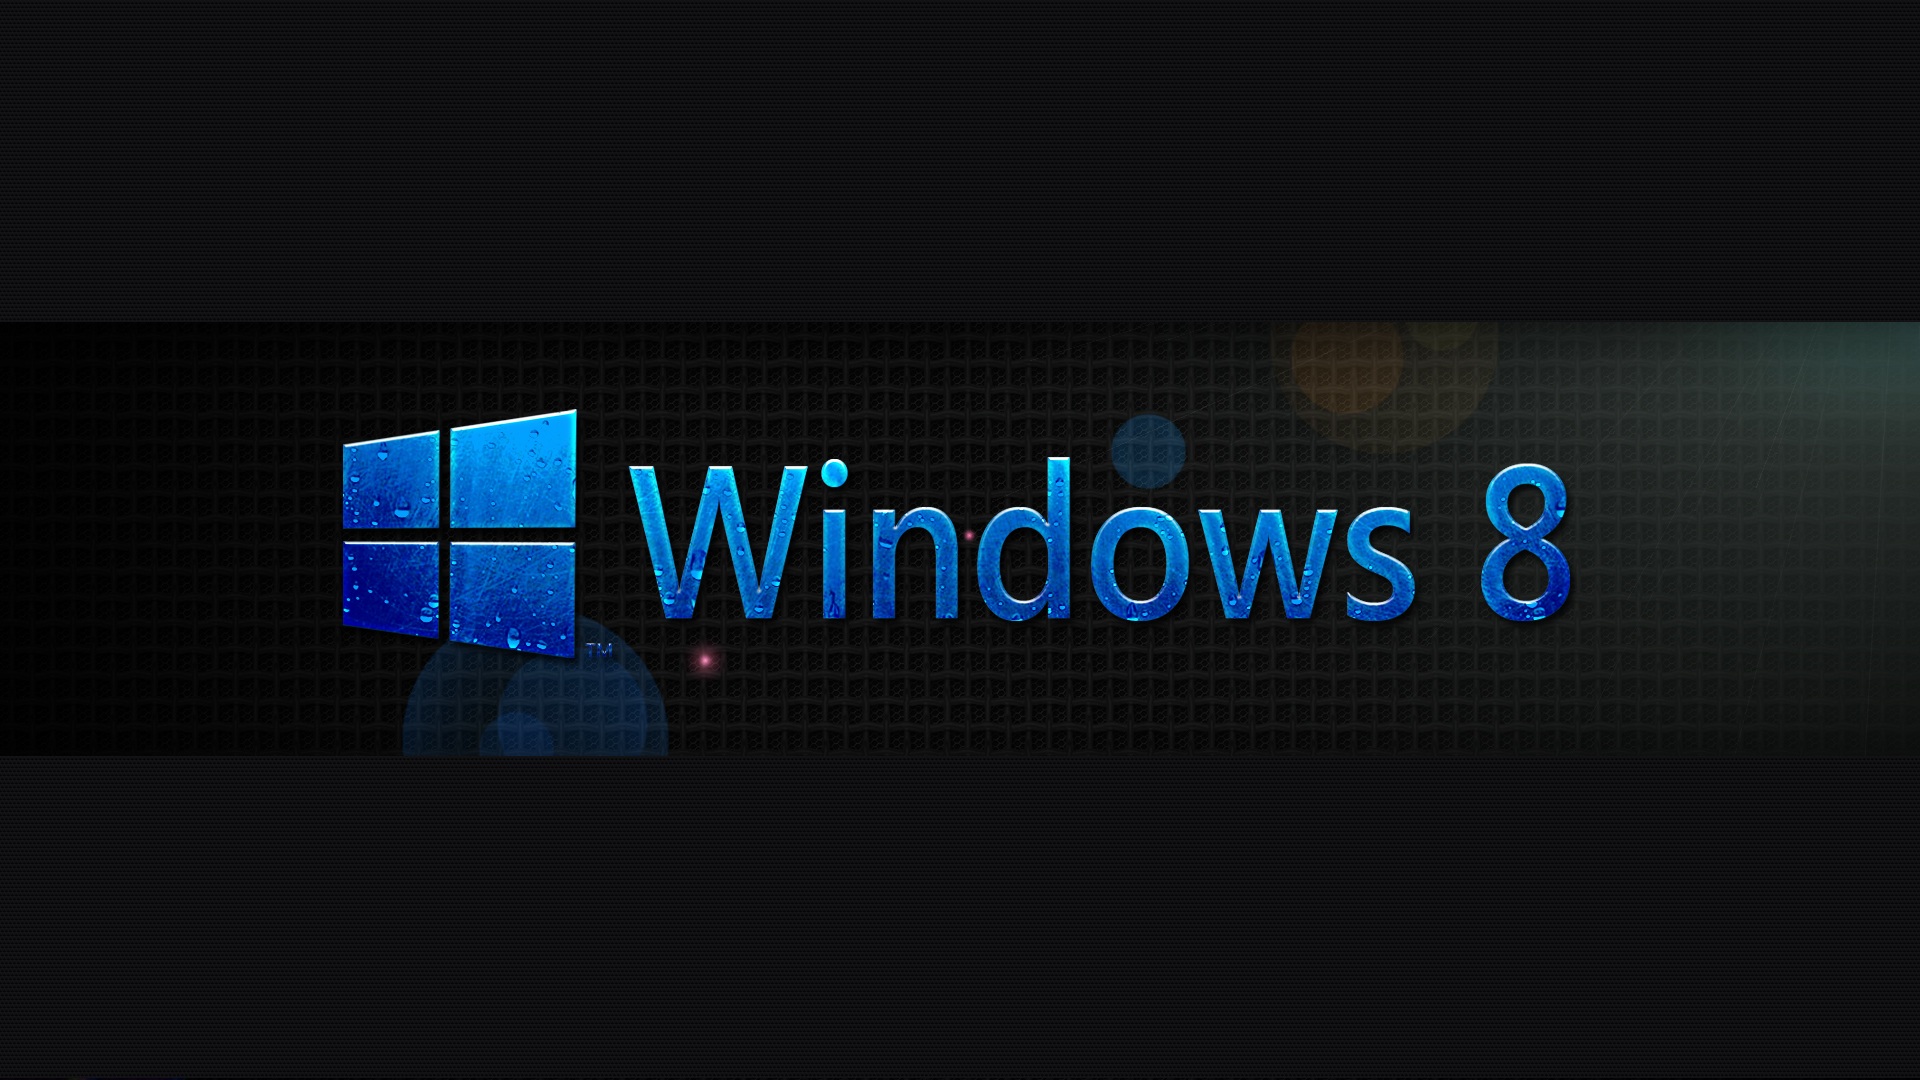 These HD Windows Wallpaper Image